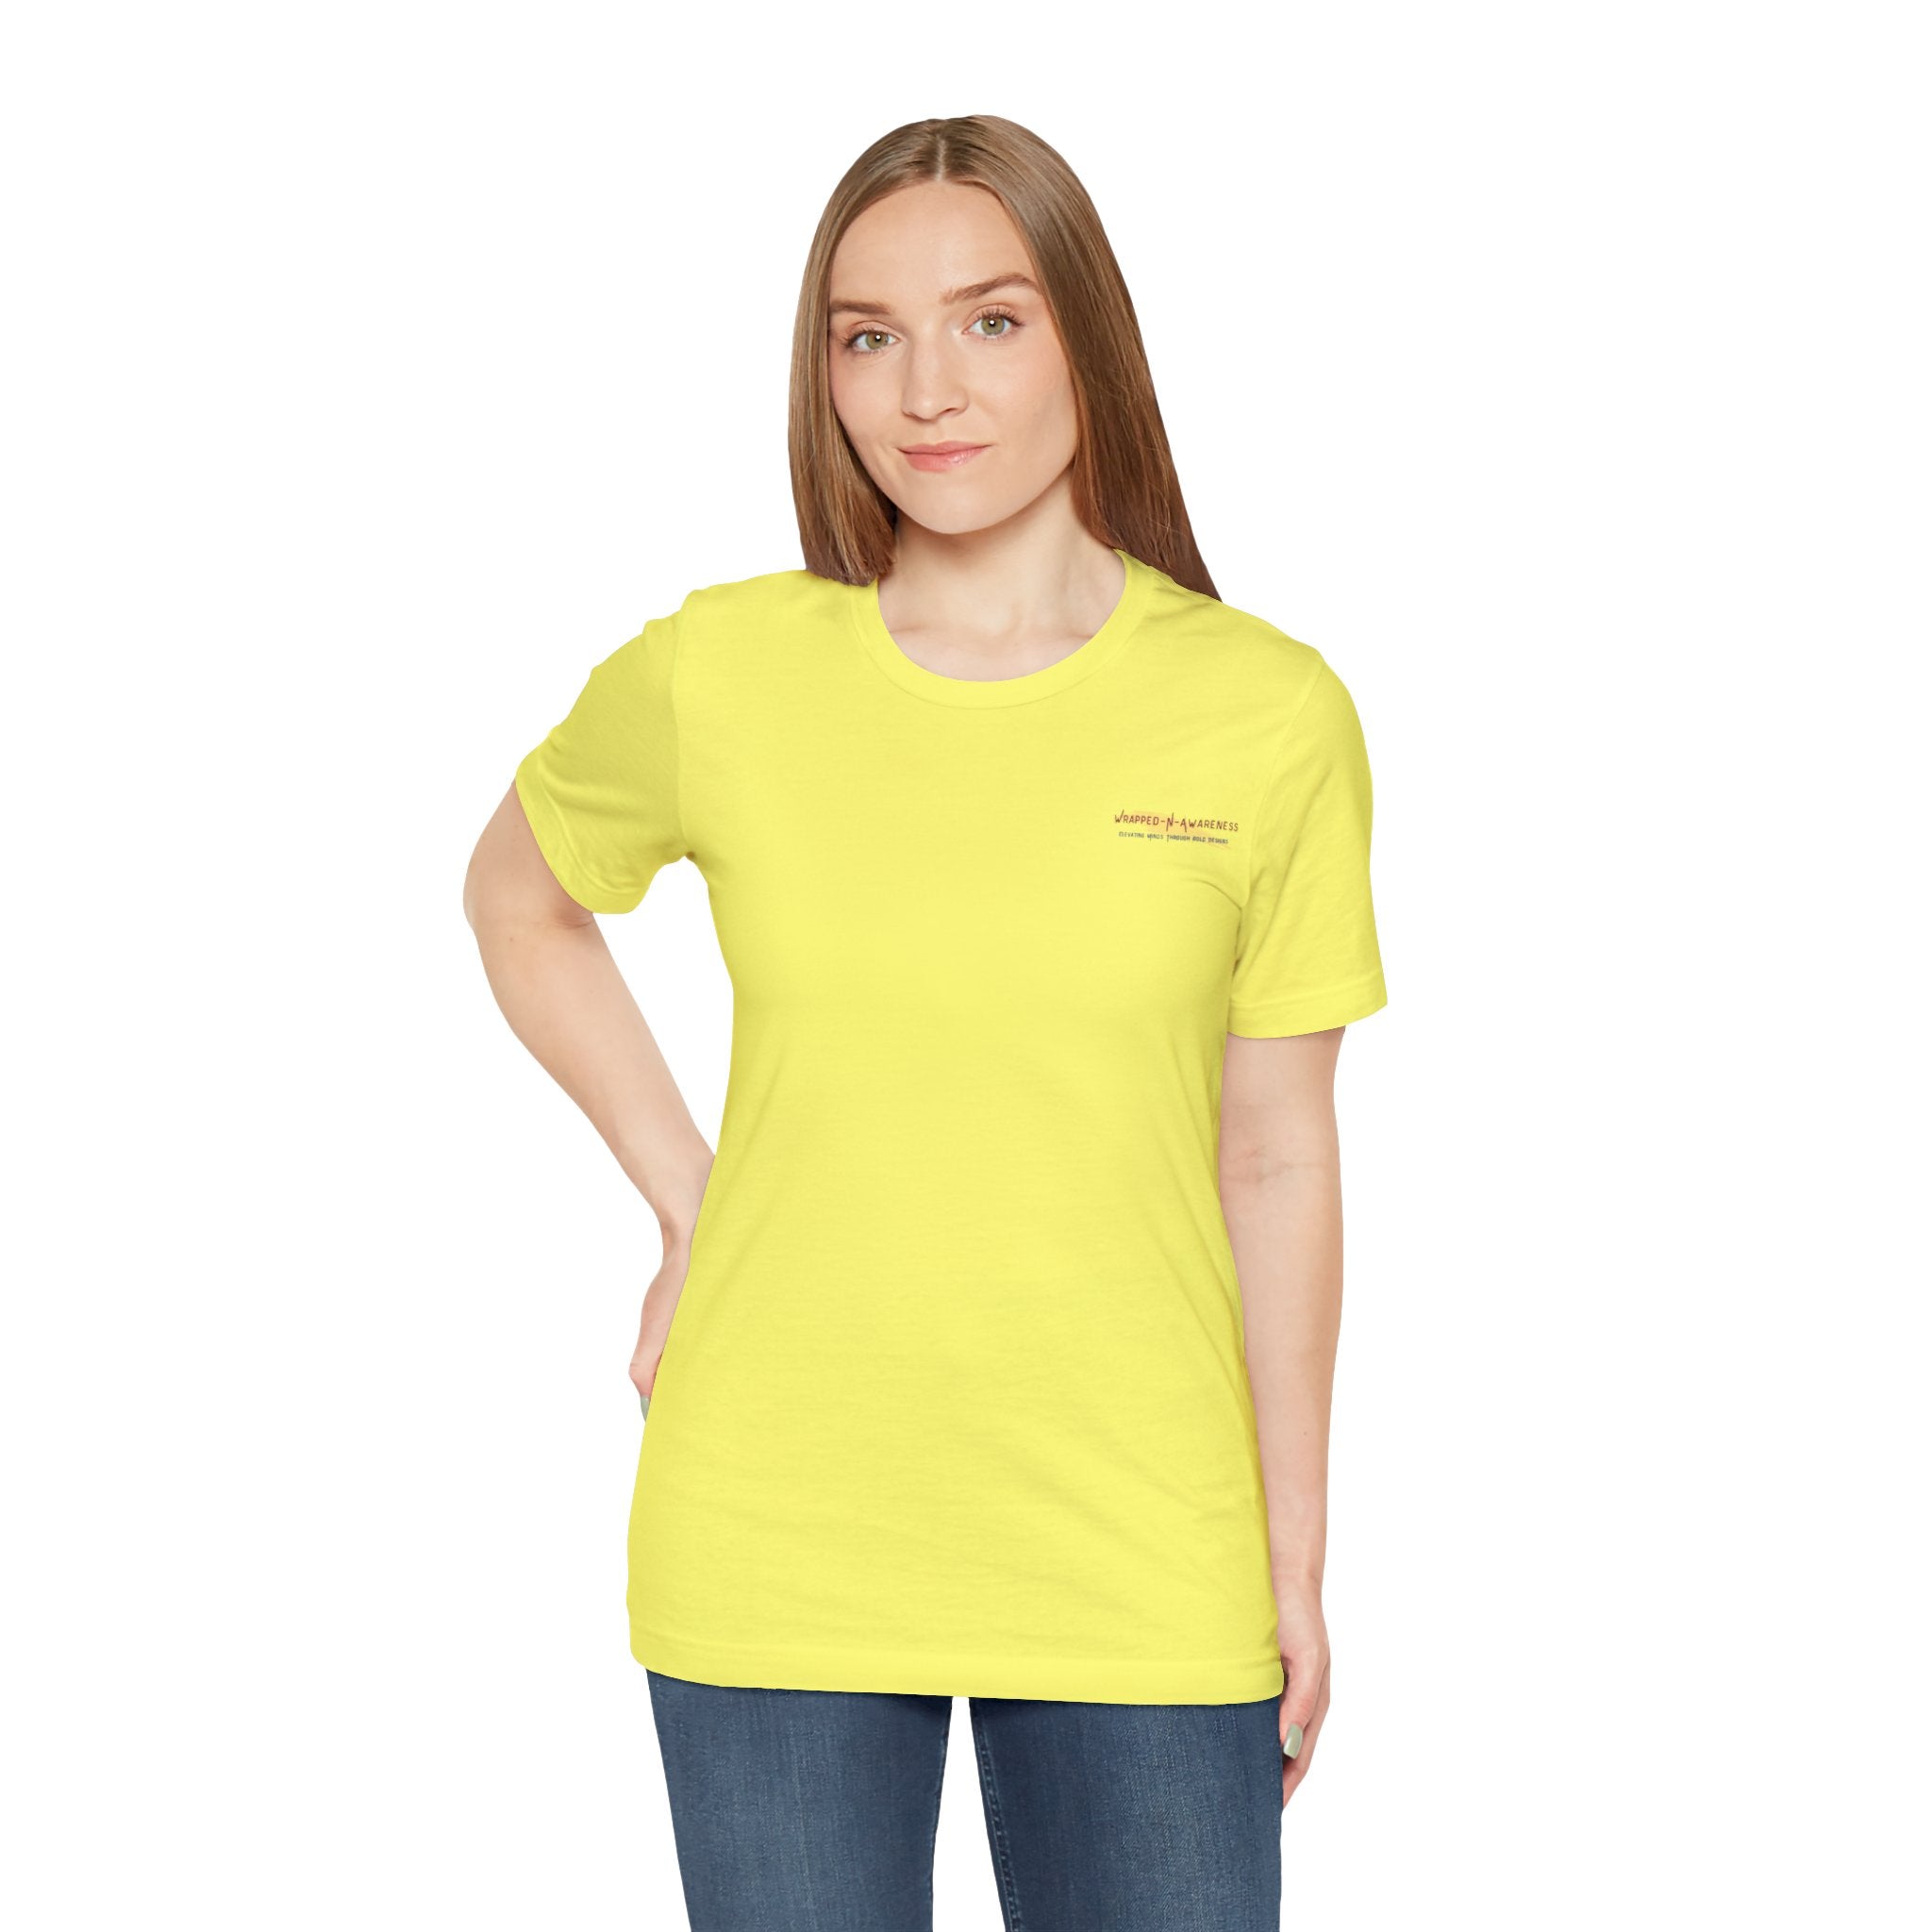 Progress Over Perfection Tee - Bella+Canvas 3001 Yellow Airlume Cotton Bella+Canvas 3001 Crew Neckline Jersey Short Sleeve Lightweight Fabric Mental Health Support Retail Fit Tear-away Label Tee Unisex Tee T-Shirt 15773394461431634797_2048 Printify